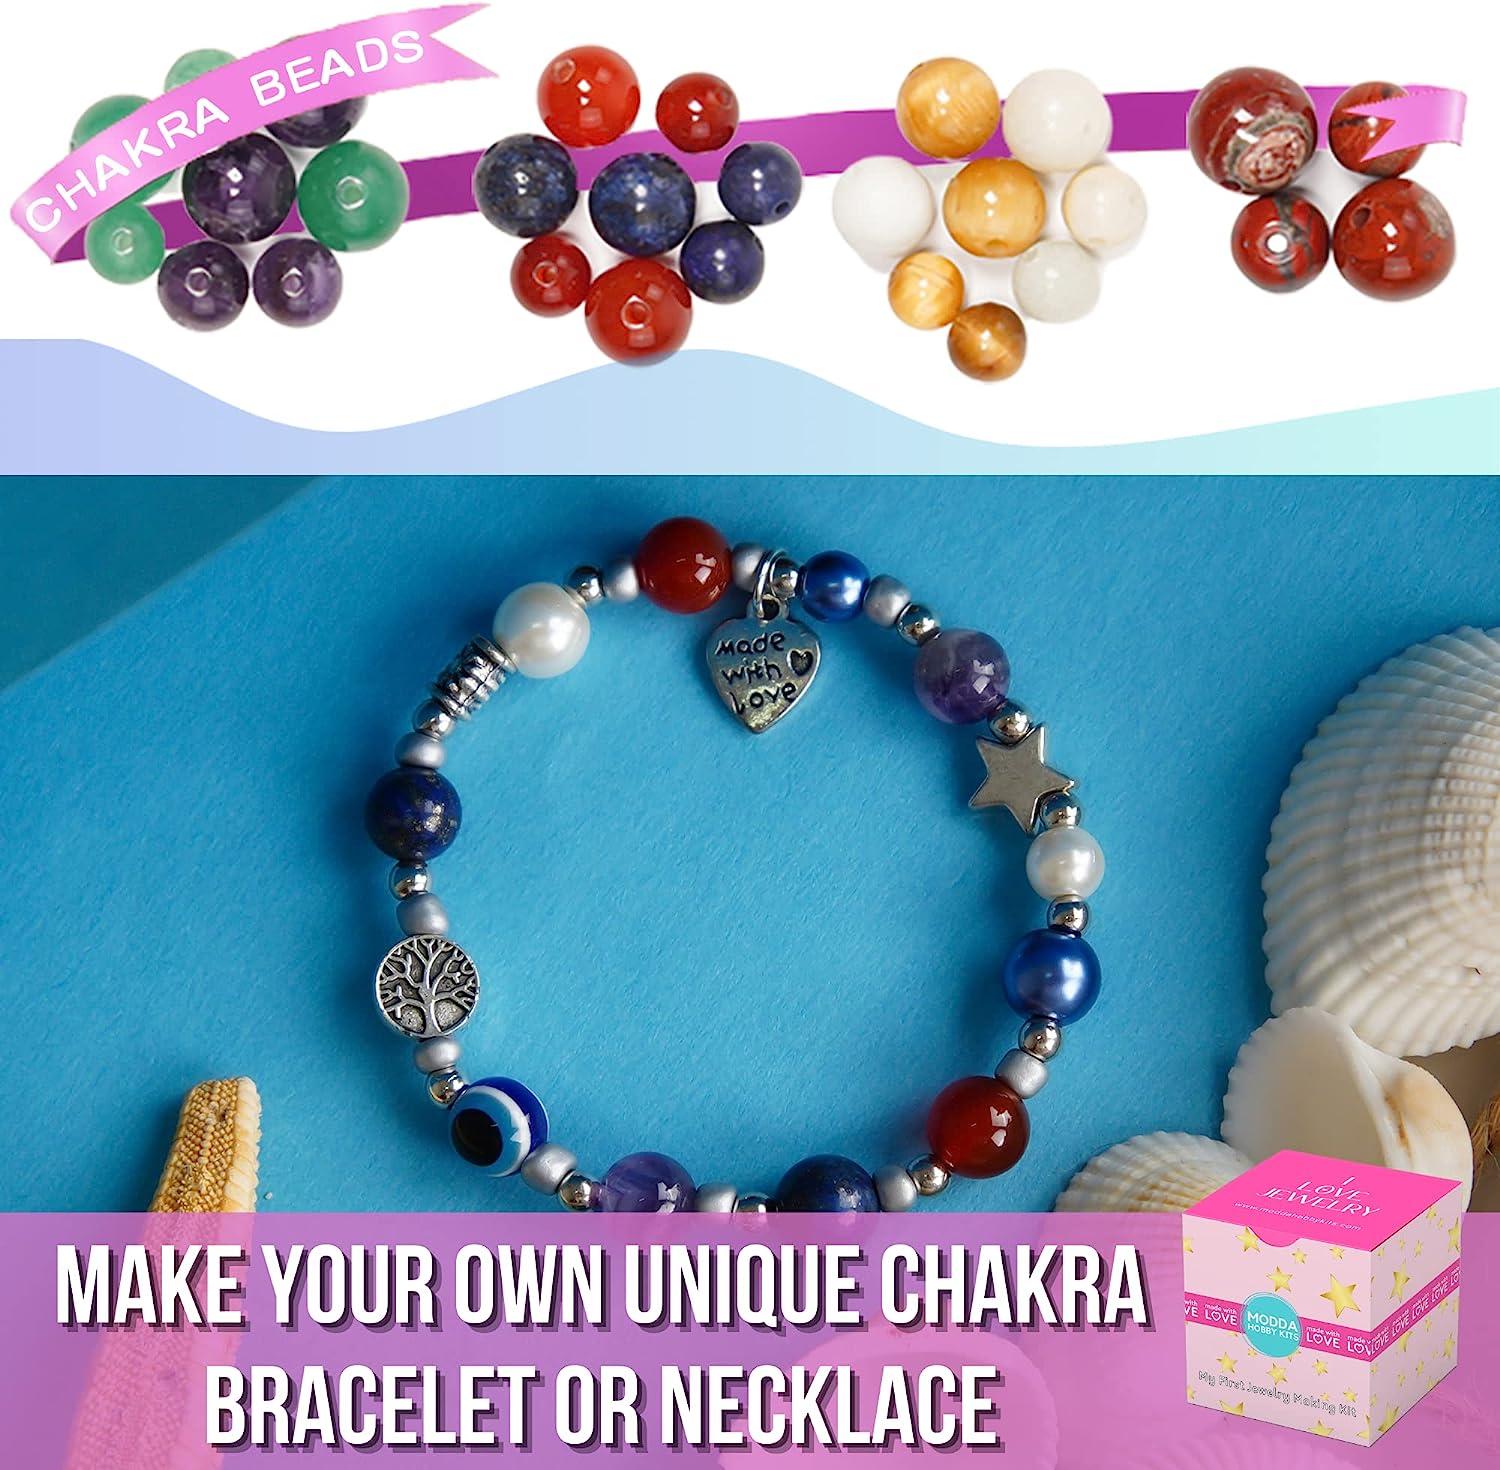 Modda Jewelry Making Kit - DIY Beading Kits for Adults, Girls, Teens and Women. Includes Deluxe Beads 